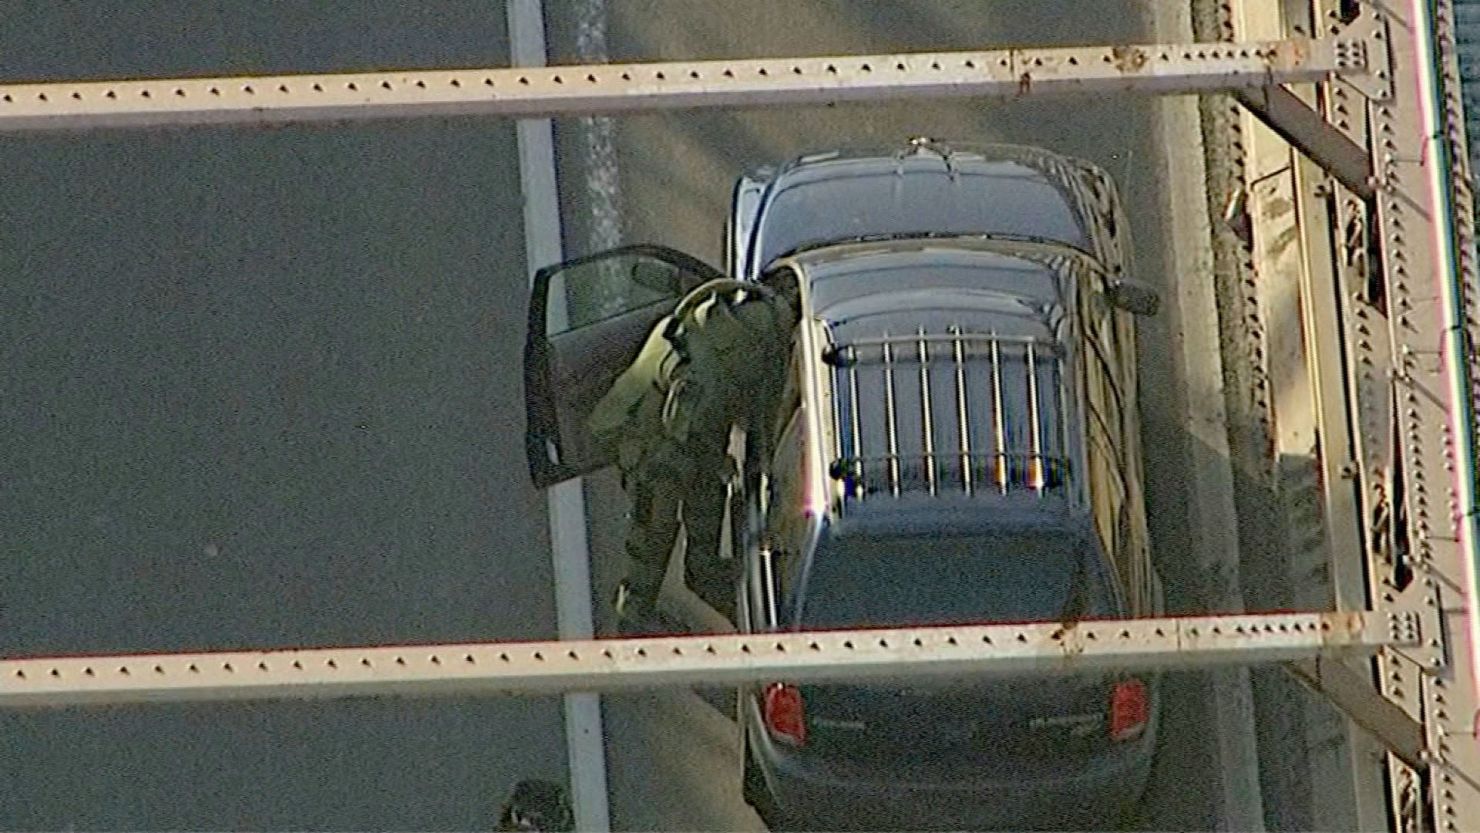 A member of the bomb squad searches the suspicious vehicle on the Brooklyn Bridge on Monday.